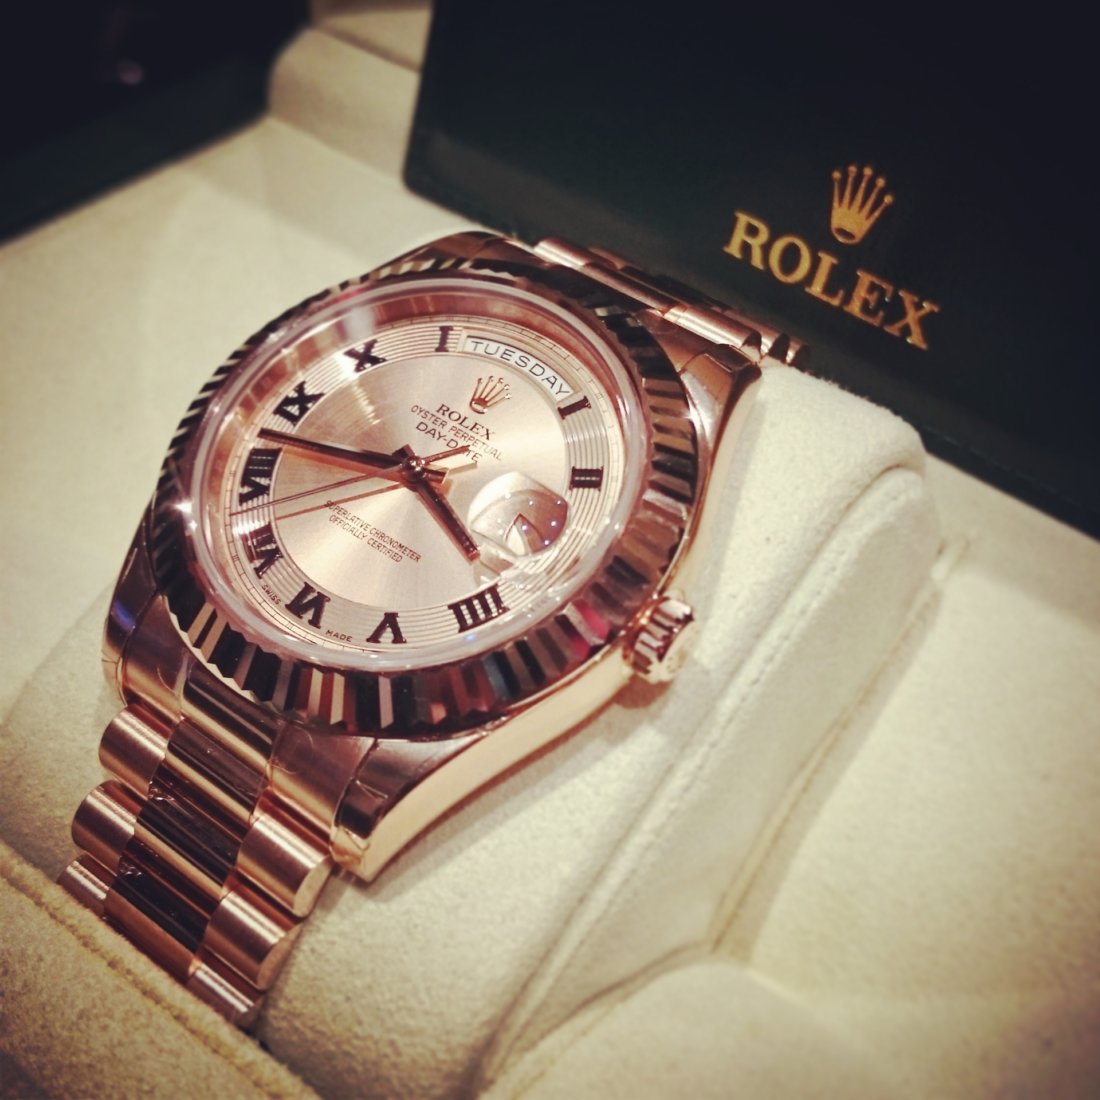 where can i get a rolex appraised